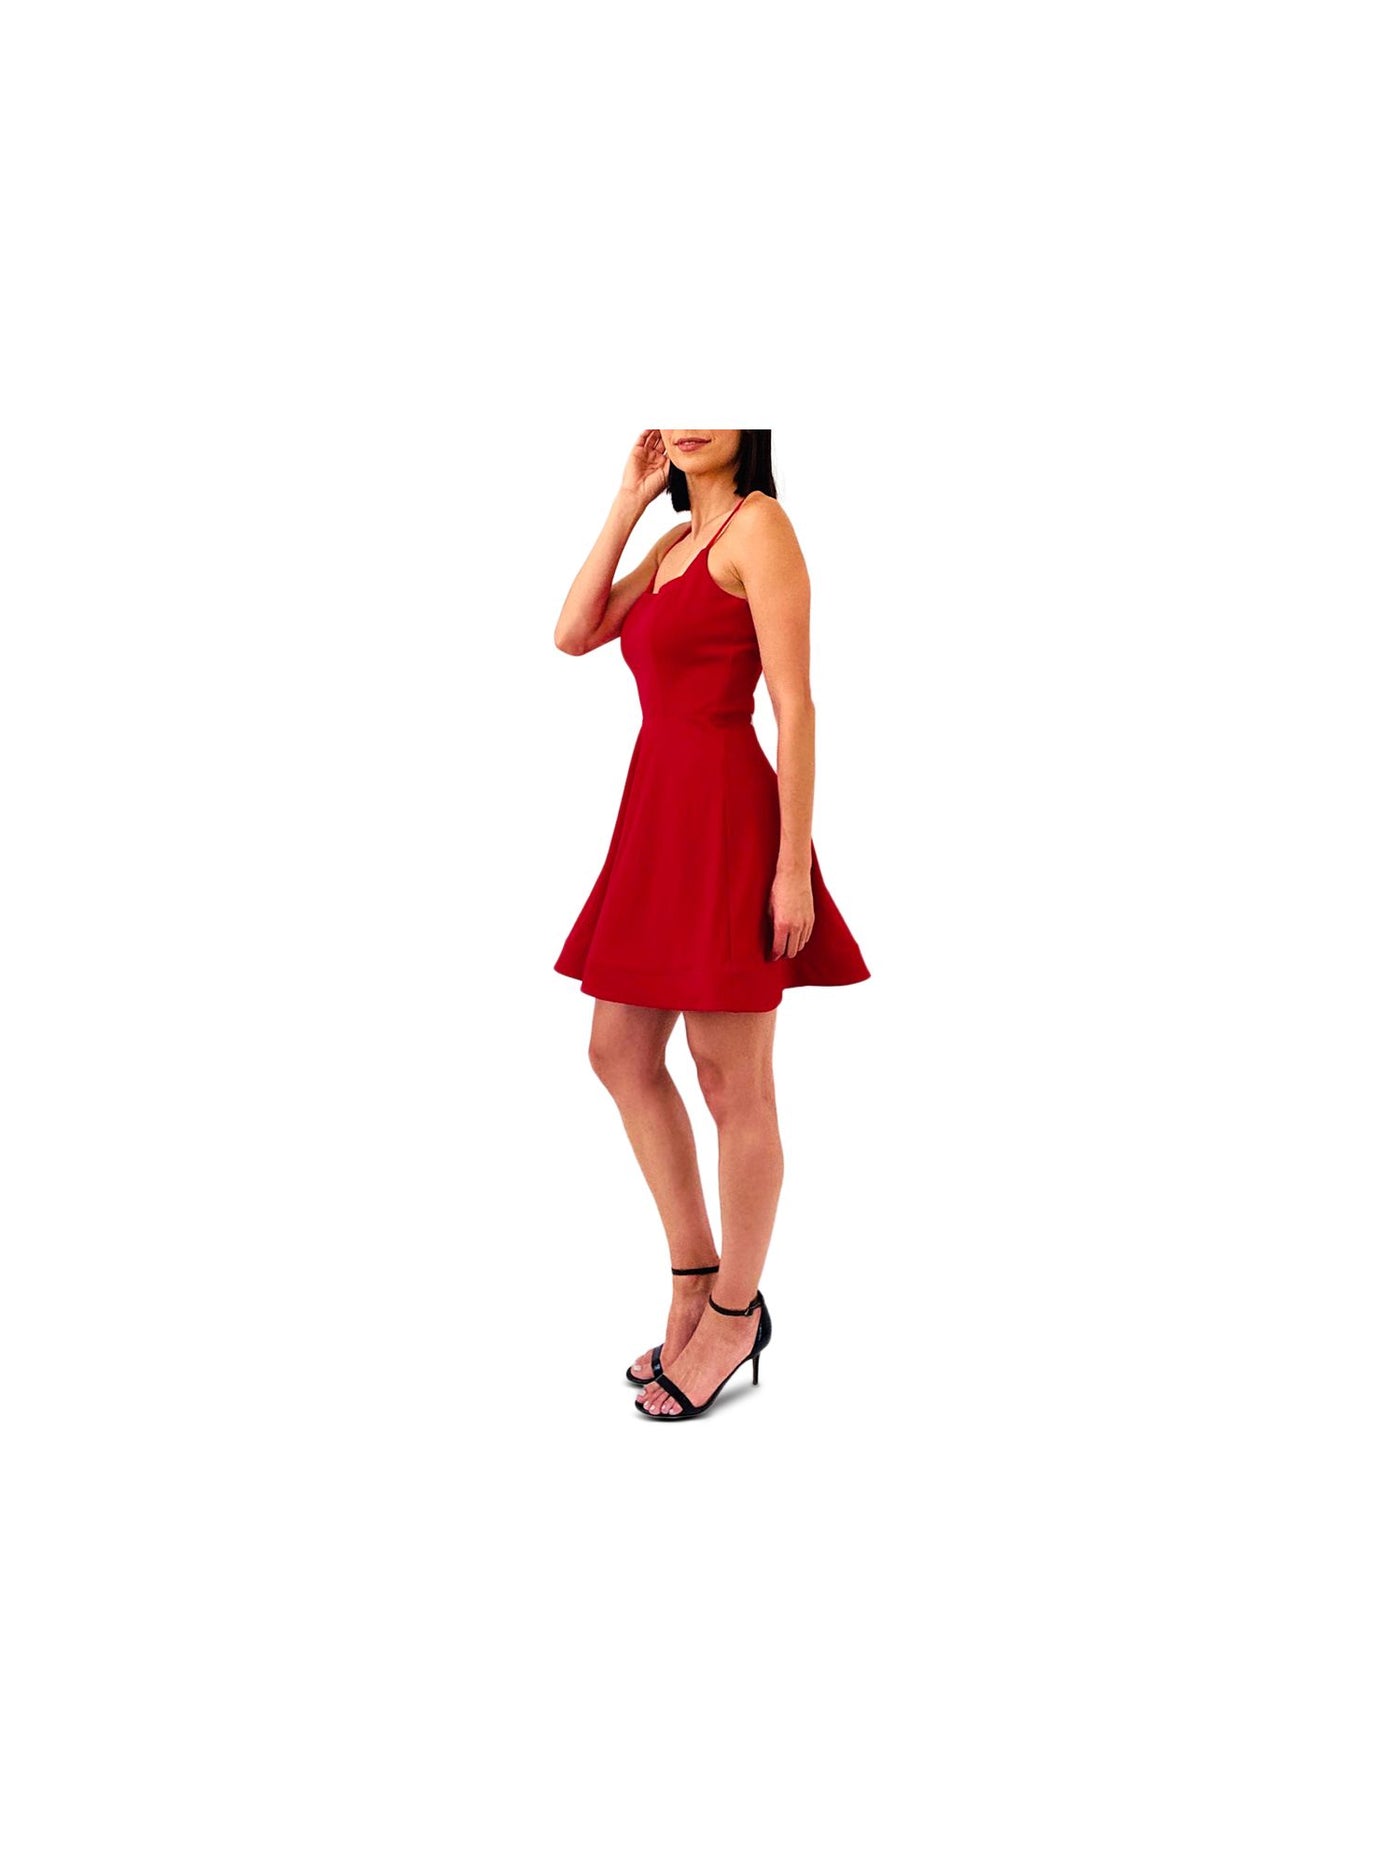 TRIXXI Womens Red Cut Out Spaghetti Strap Square Neck Short Party Fit + Flare Dress Juniors 3